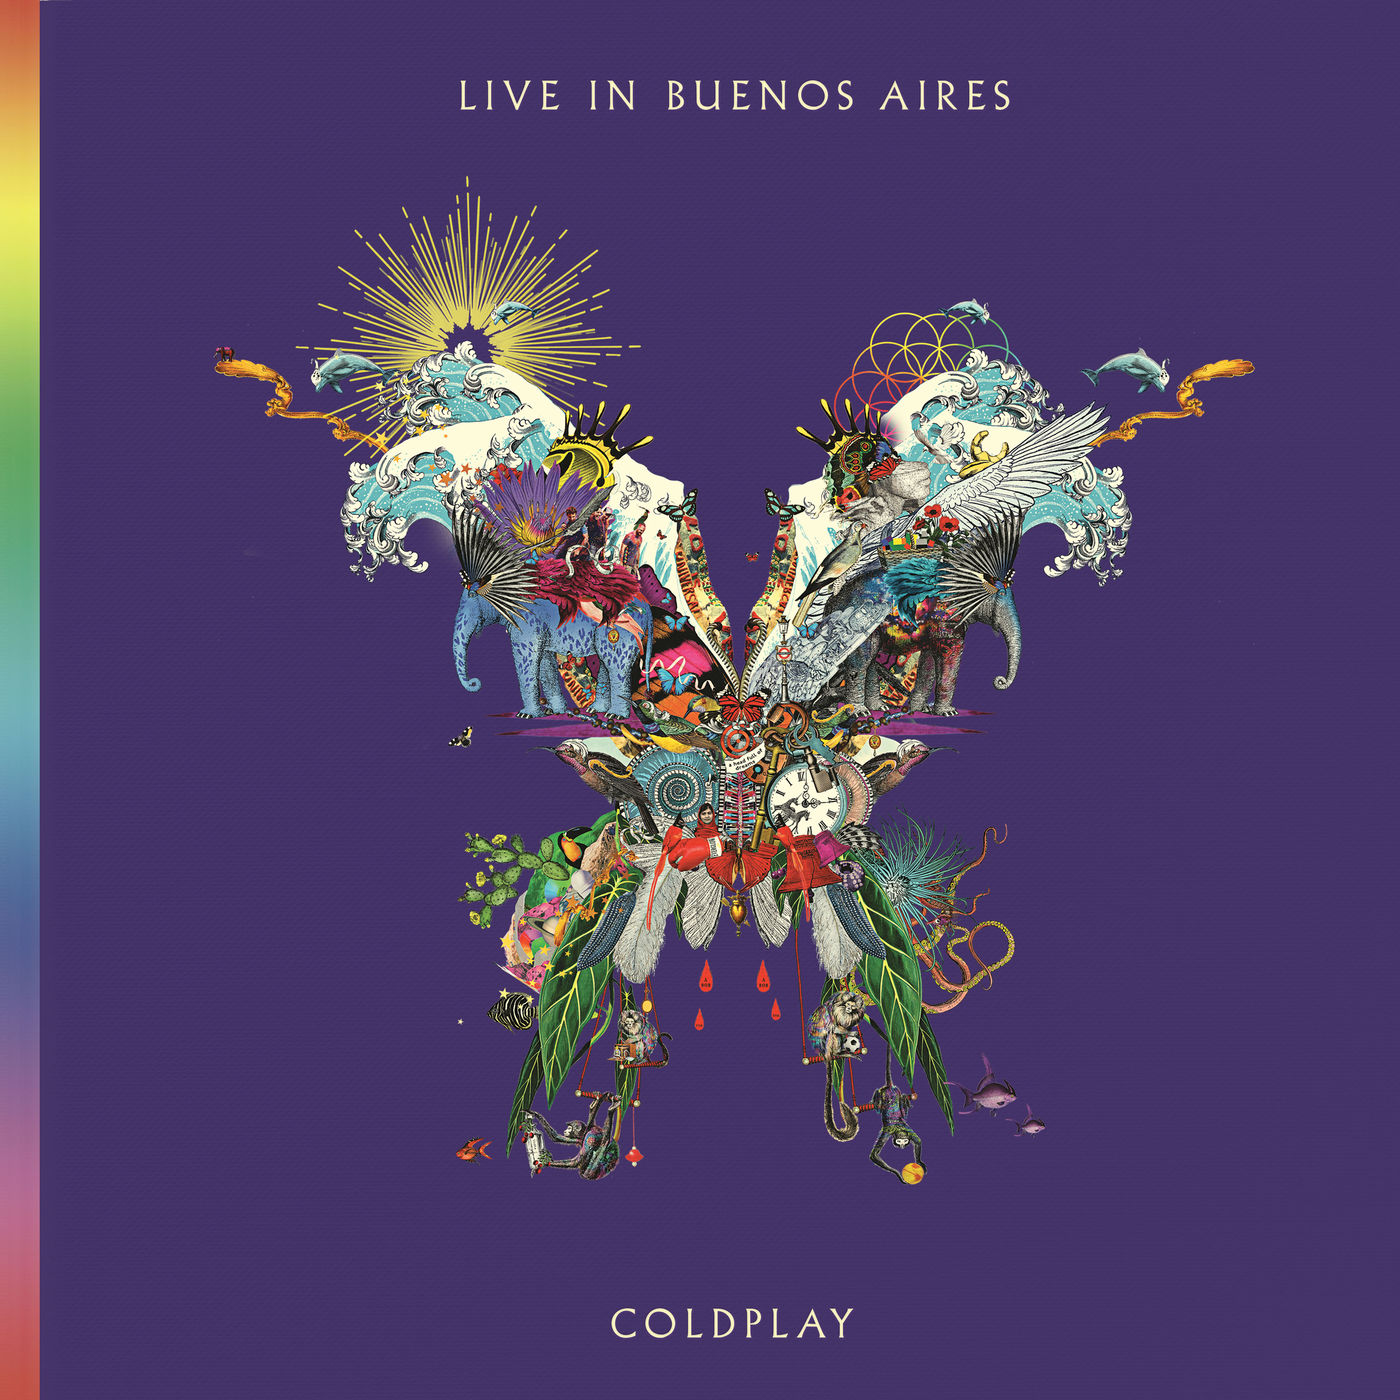 Coldplay - Live in Buenos Aires (2018) Album Info